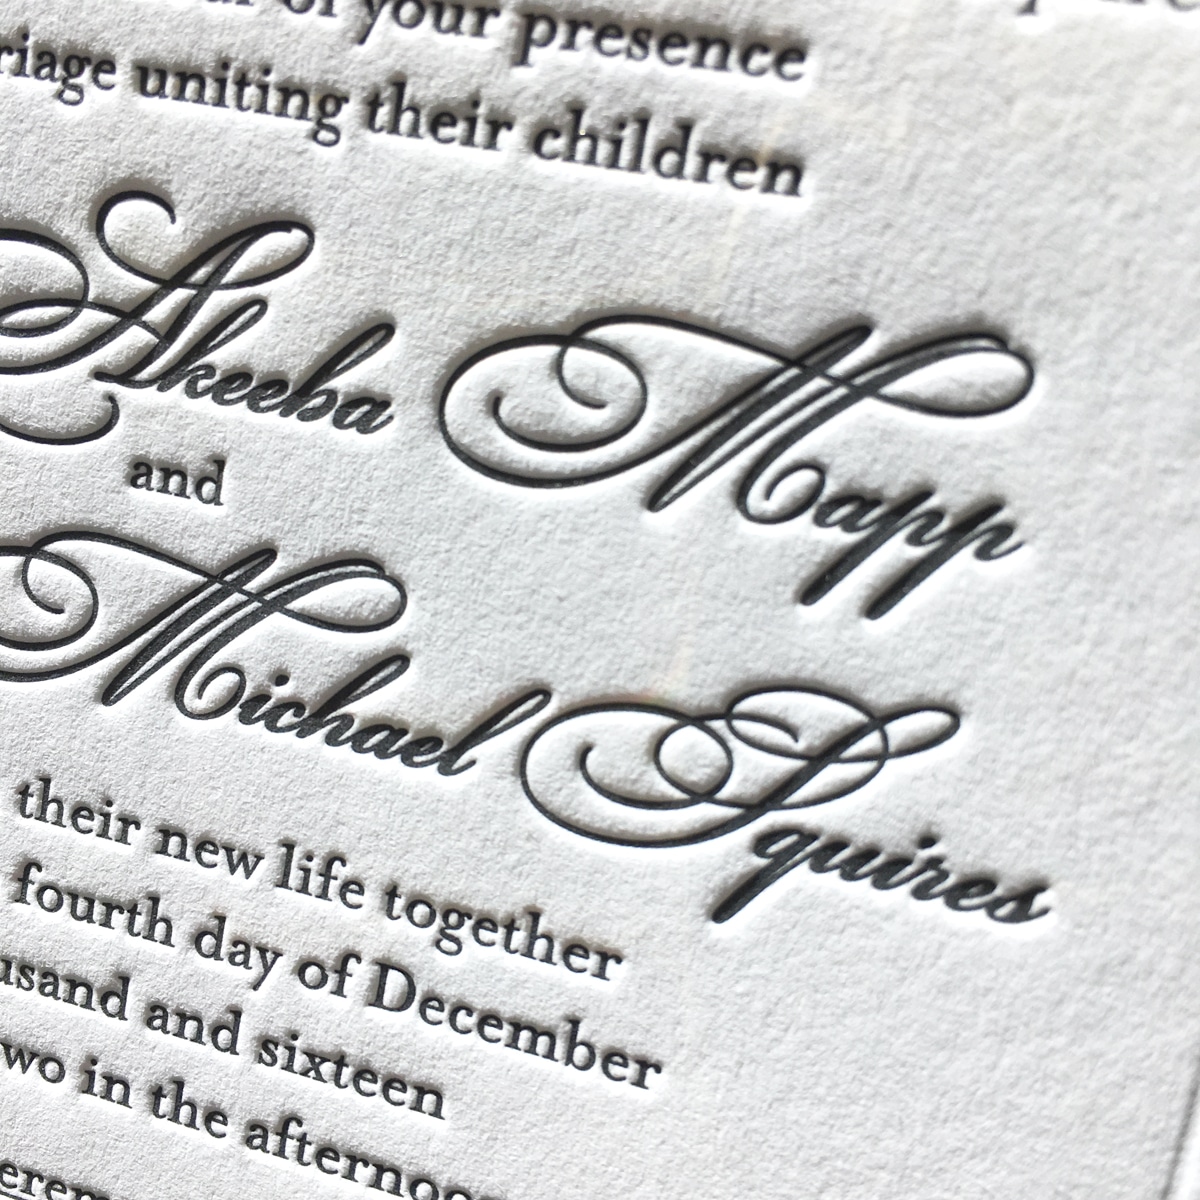 Elegant letterpress wedding invitations with classic debossed printing by James Mospens. Chic and polished printing. Perfect for a standout celebration. www.mospensstudio.com